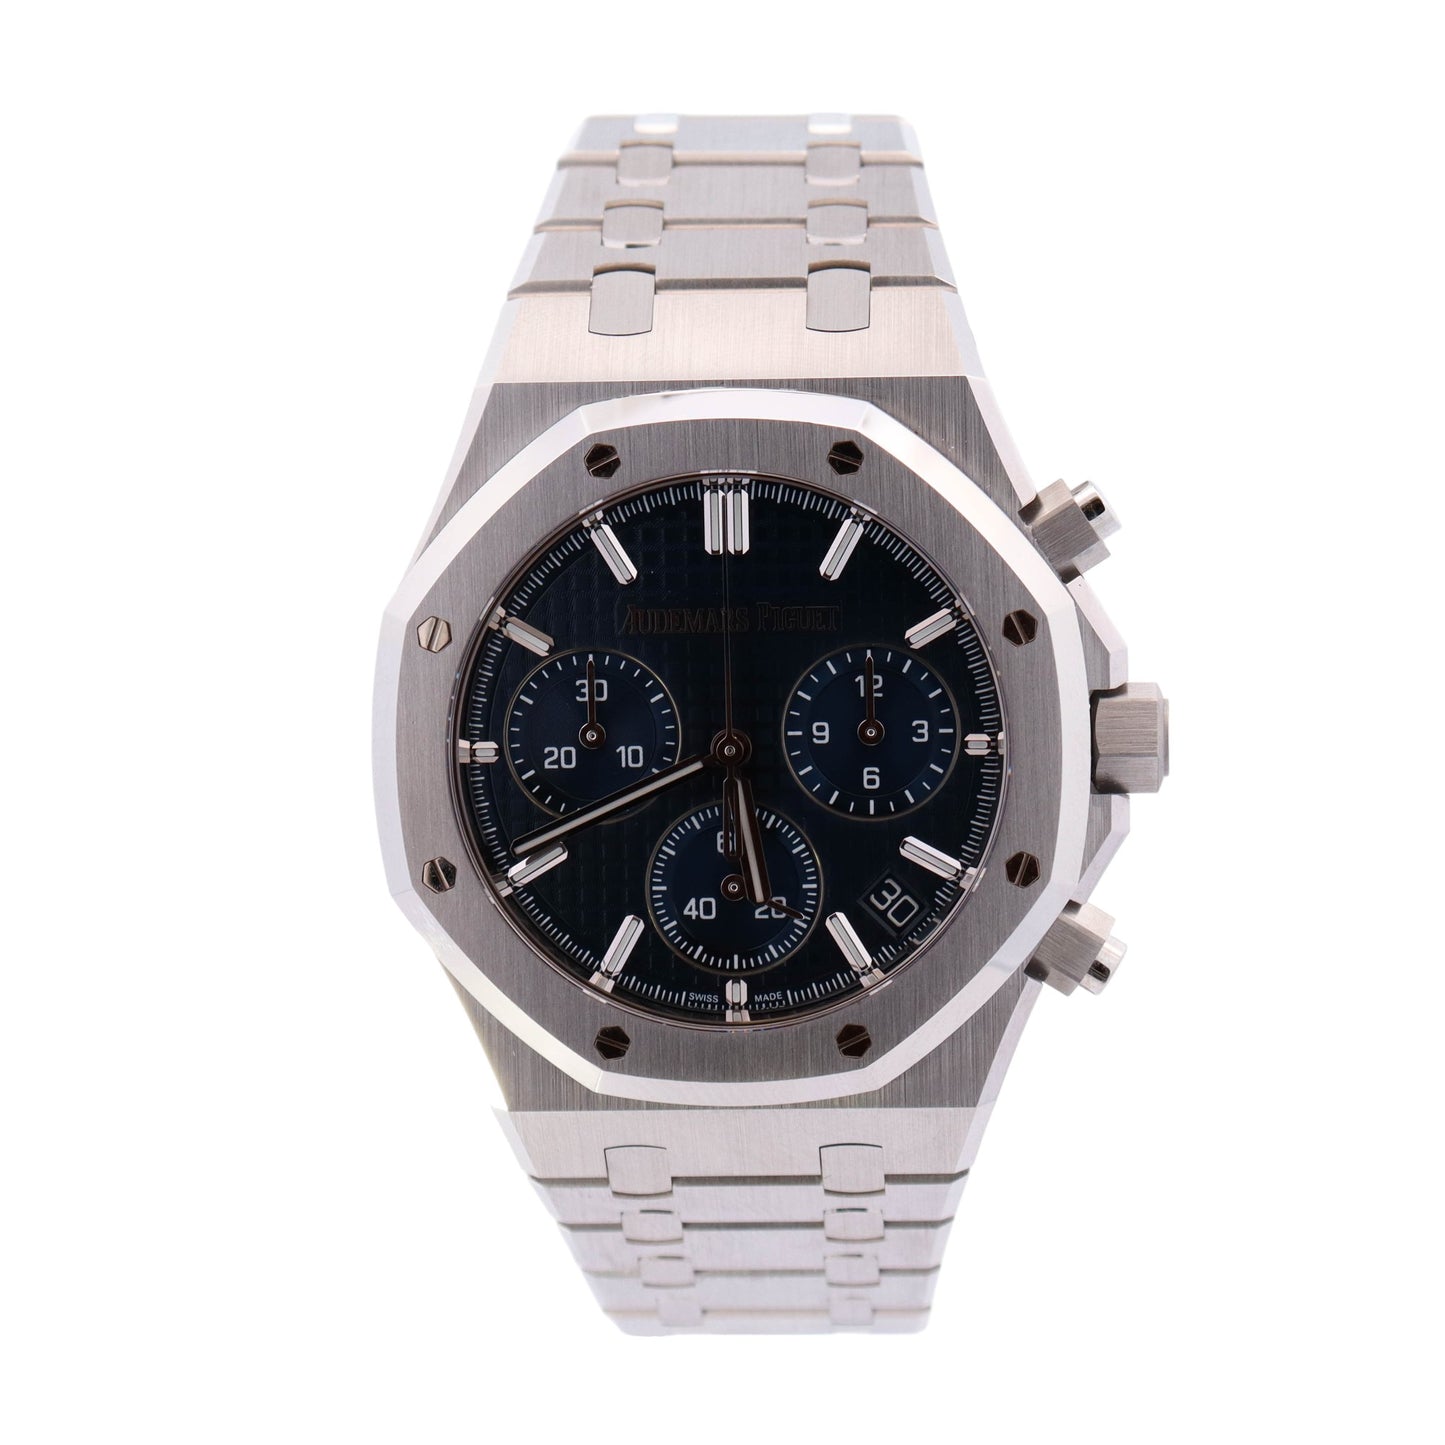 Audemars Piguet Royal Oak Stainless Steel 41mm Blue Chronograph Dial Watch Reference# 26240ST.OO.1320ST.05 - Happy Jewelers Fine Jewelry Lifetime Warranty